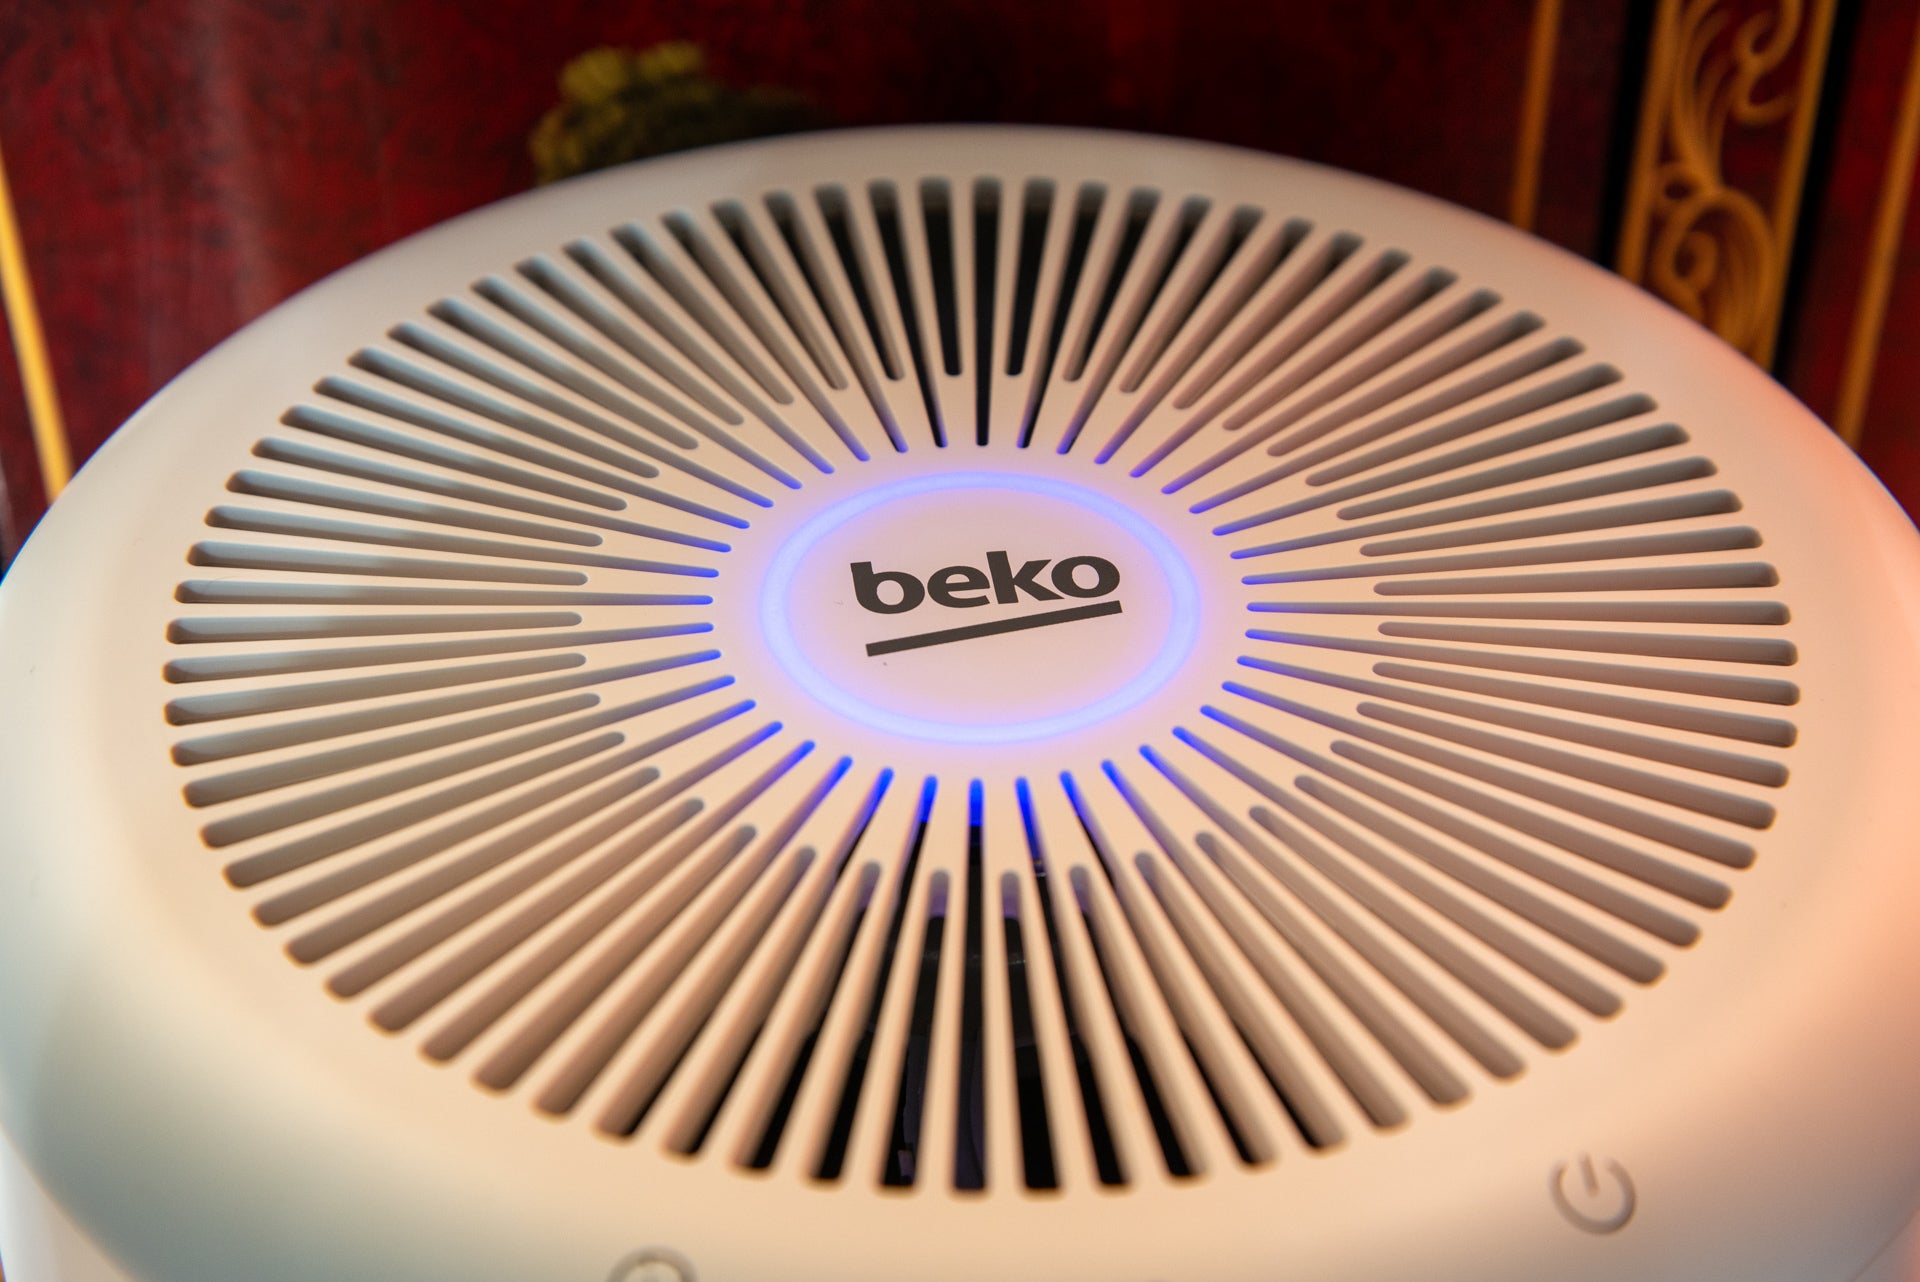 Beko Air Purifier with HEPA Filter and HygieneShield ATP6100I good air quality